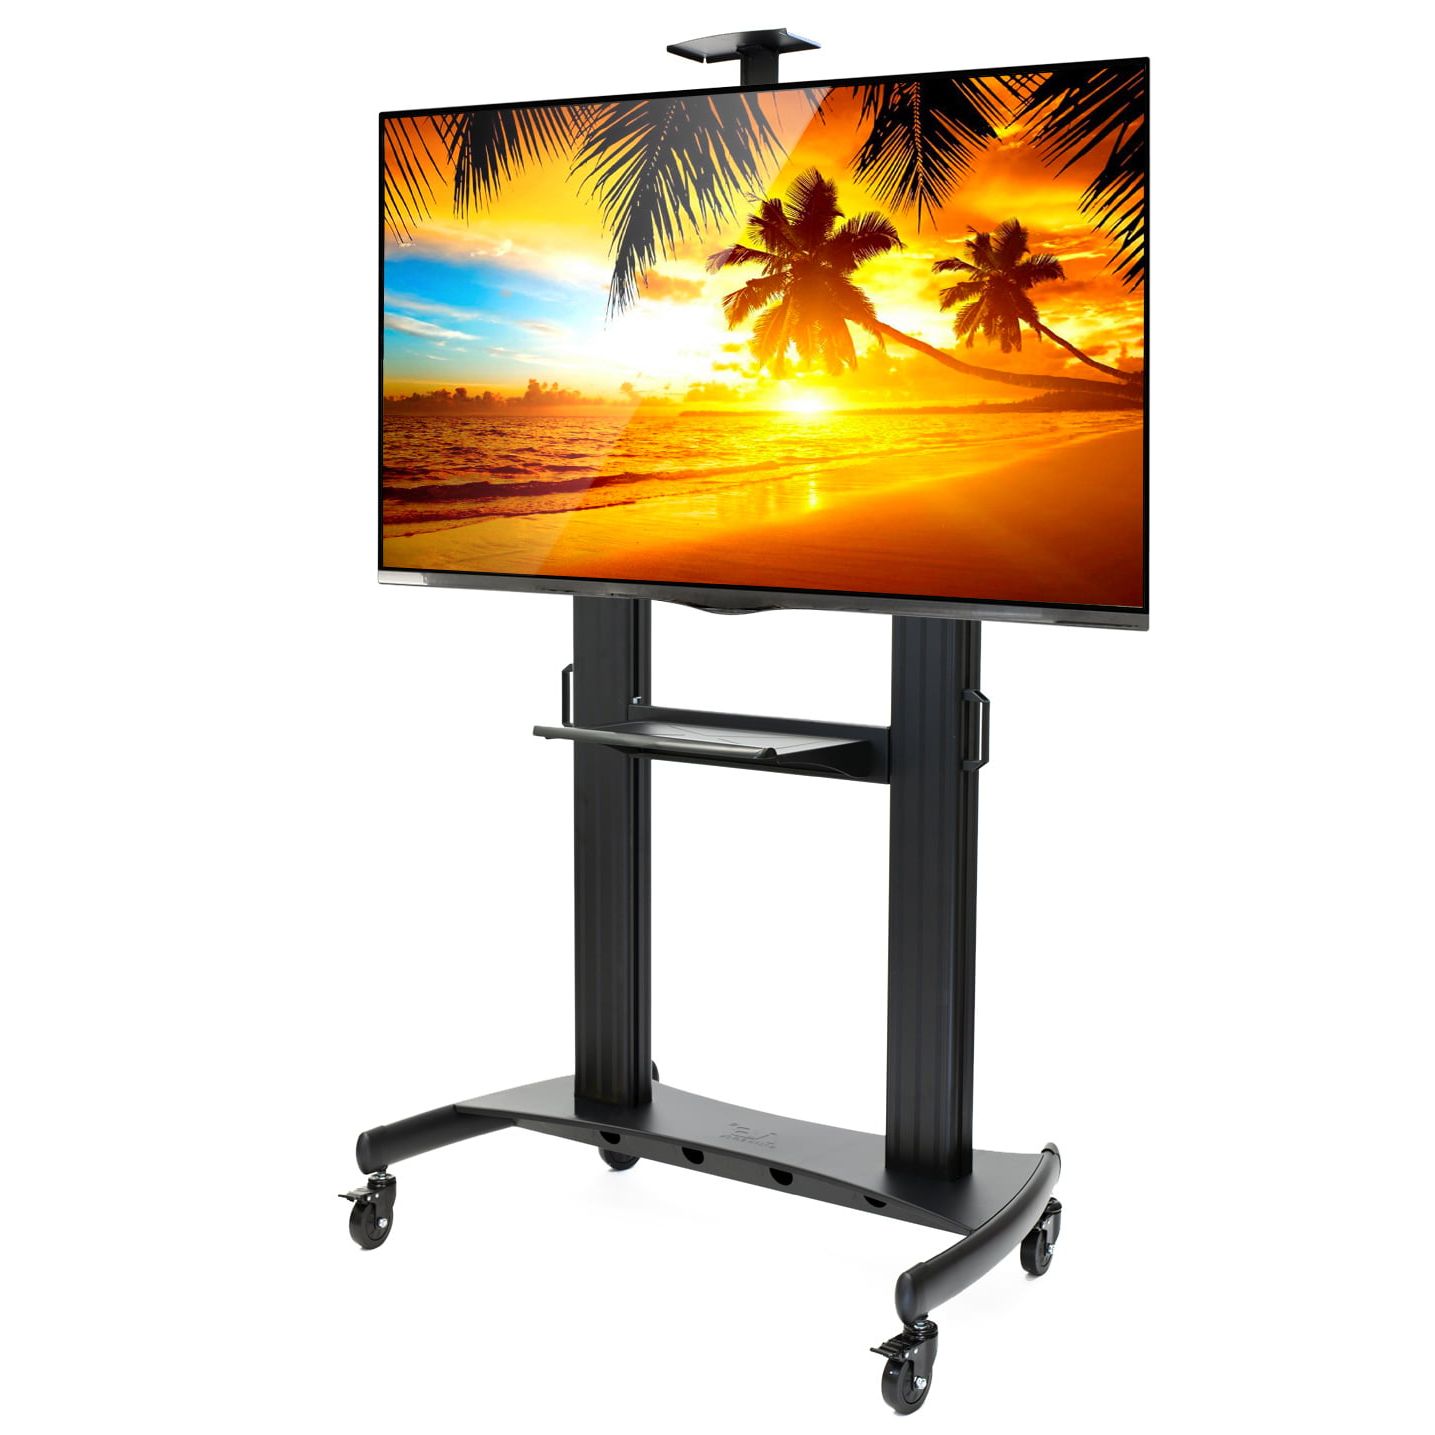 Rolling Tv Stand Mobile Tv Cart For 60" – 100" Flat Screen, Led, Lcd Throughout Well Known Foldable Portable Adjustable Tv Stands (View 8 of 15)